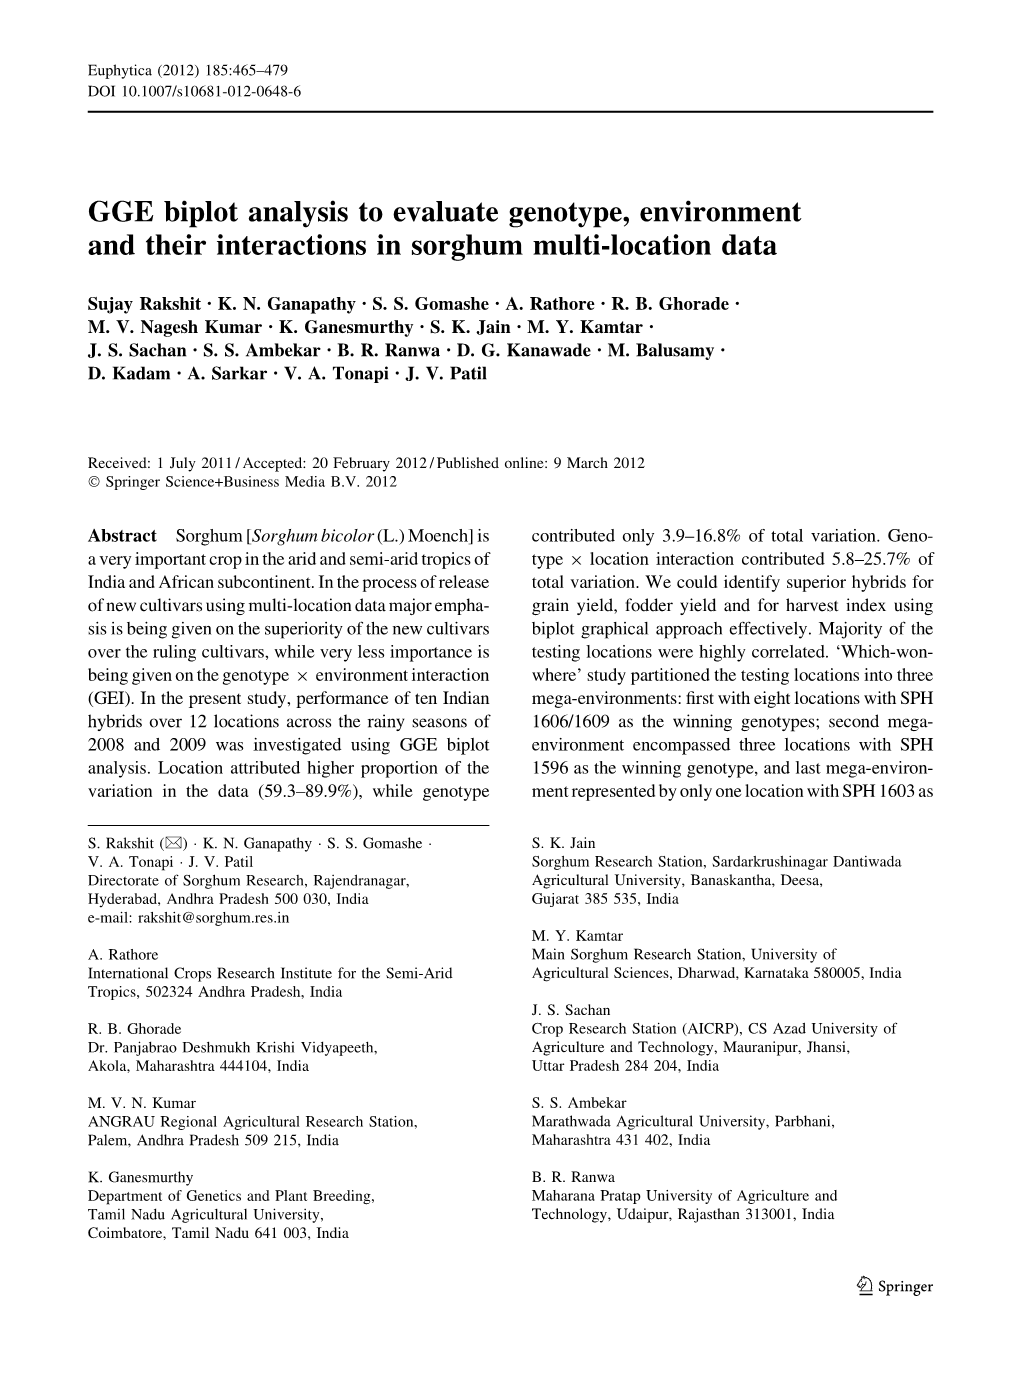 GGE Biplot Analysis to Evaluate Genotype, Environment and Their Interactions in Sorghum Multi-Location Data